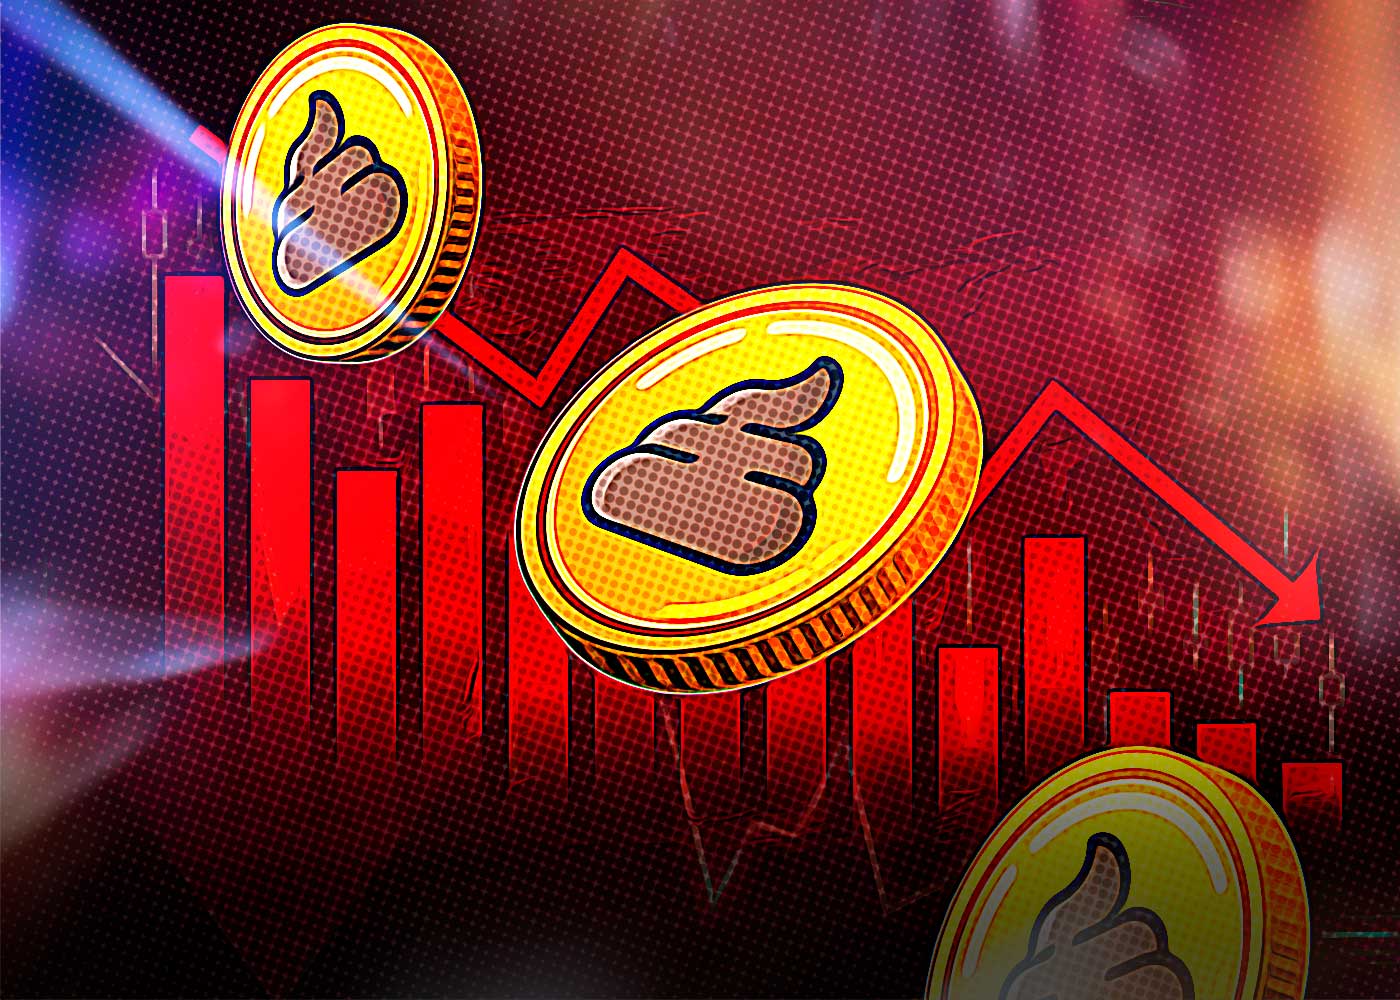 Investing in Crypto? Watch Out for These Shitcoin Red Flags2